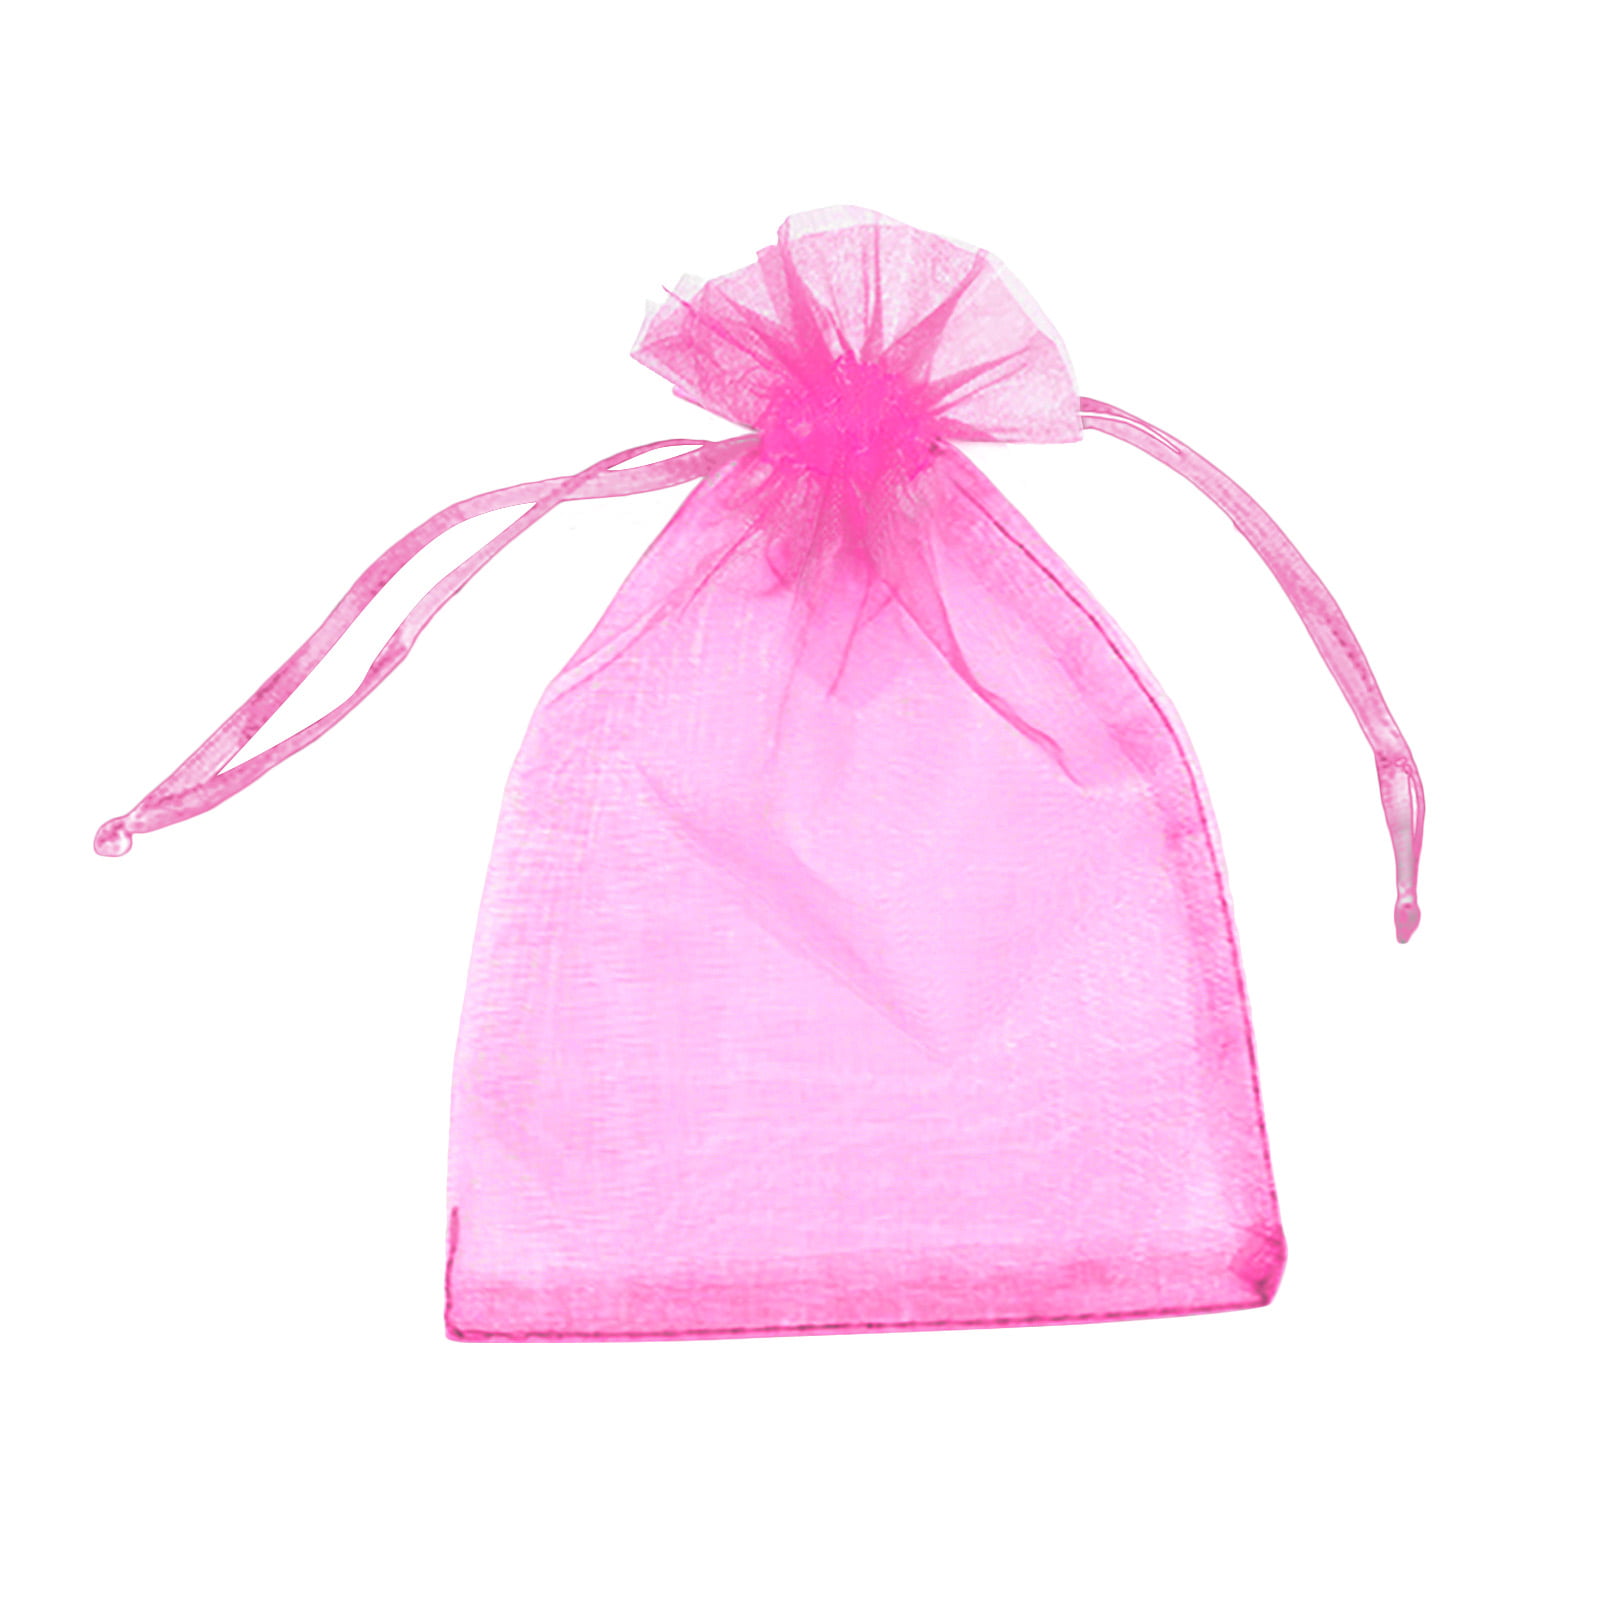 Details about   200pcs Organza Wedding Party Favor Christmas Gift Candy Bags Jewelry Pouch